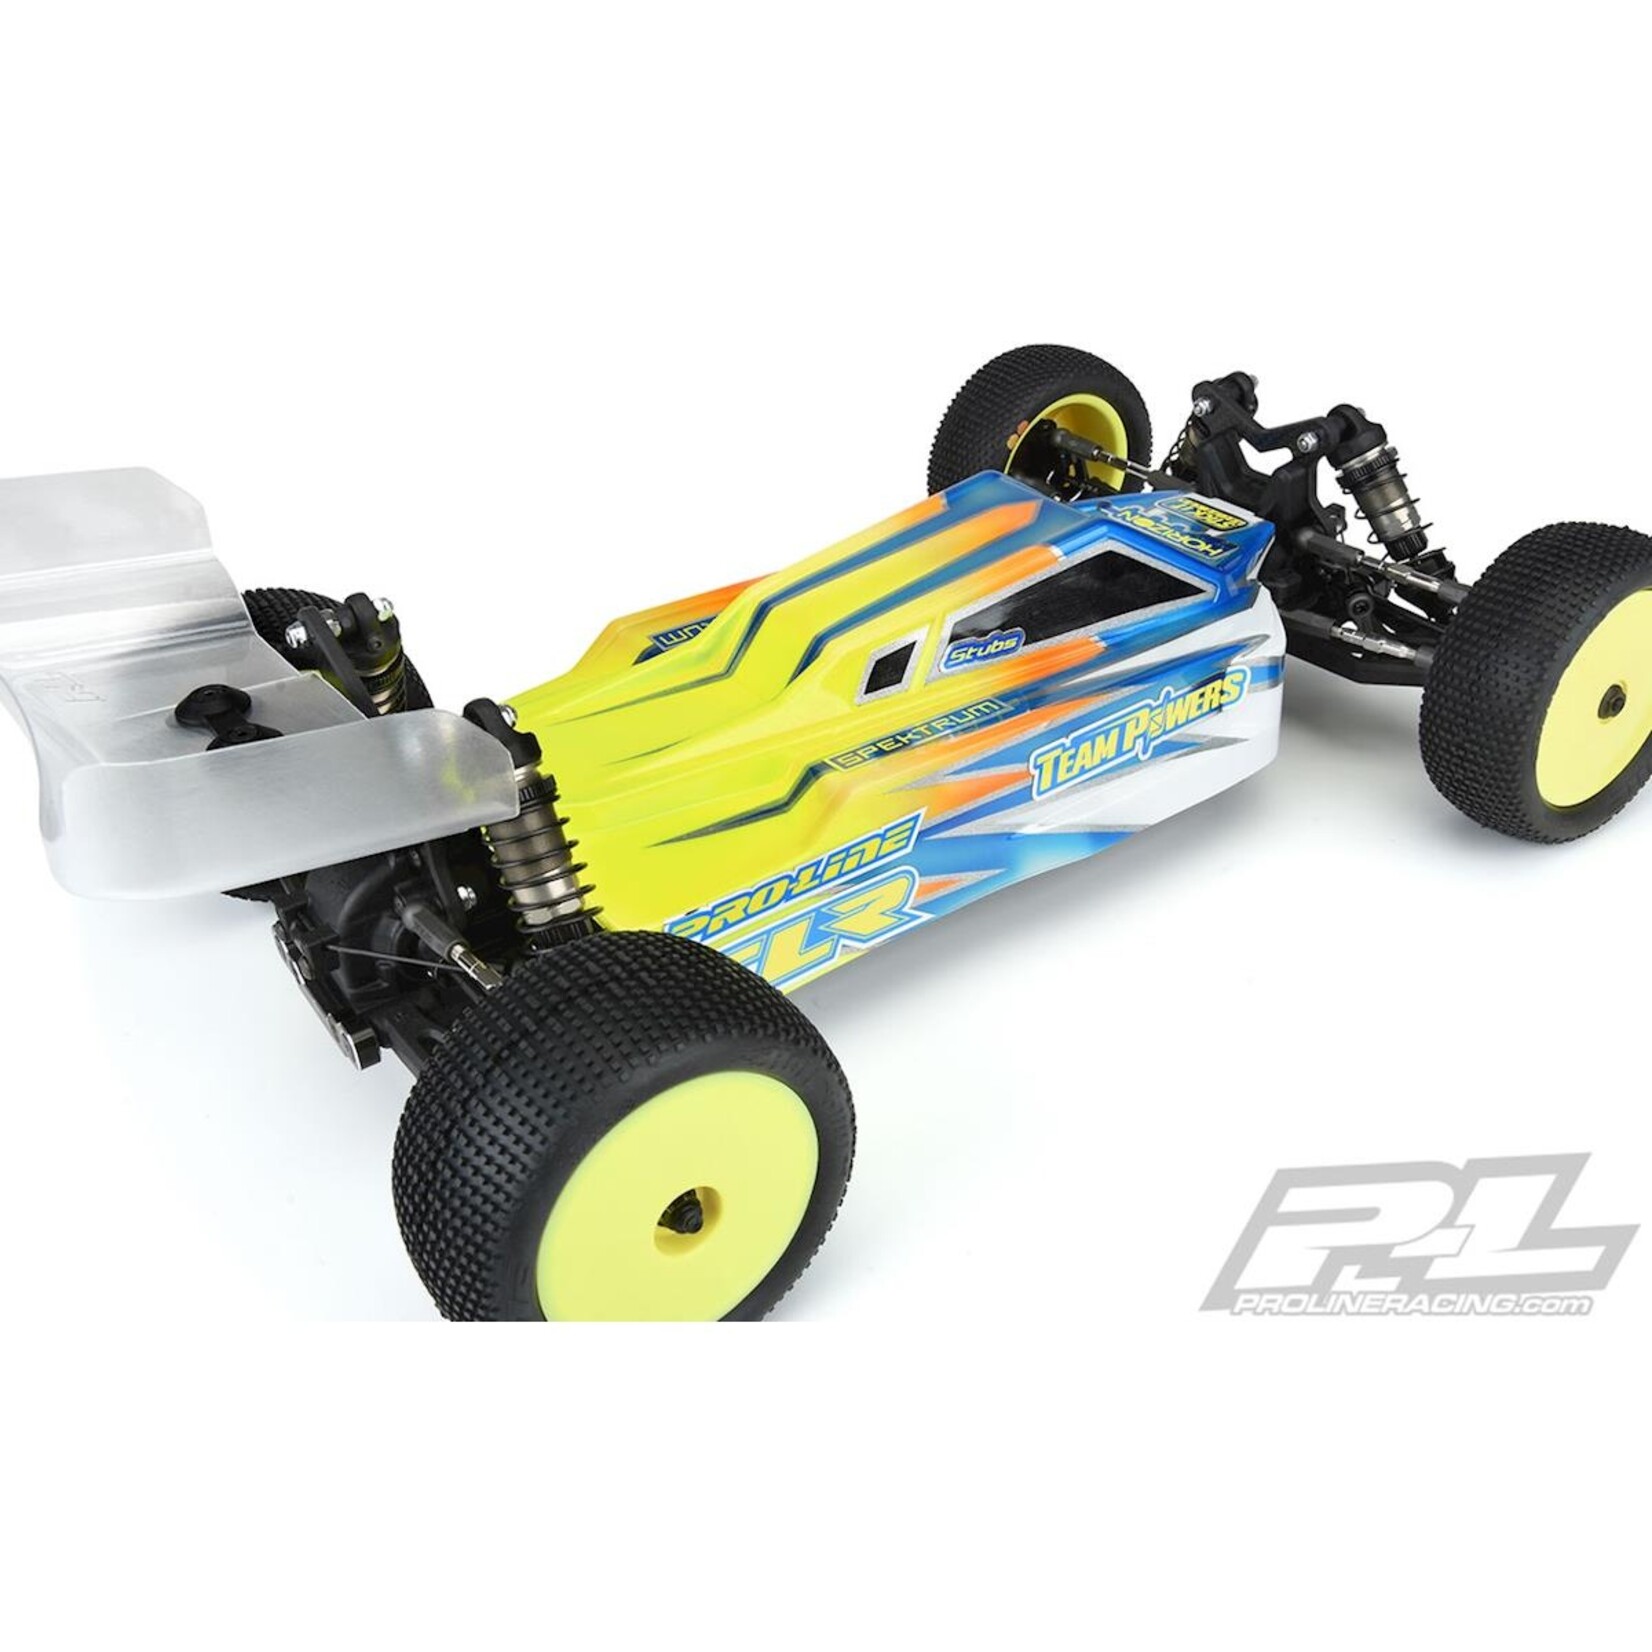 Pro-Line Pro-Line TLR 22X-4 Axis 4WD 1/10 Buggy Lightweight Body (Clear) #3545-25